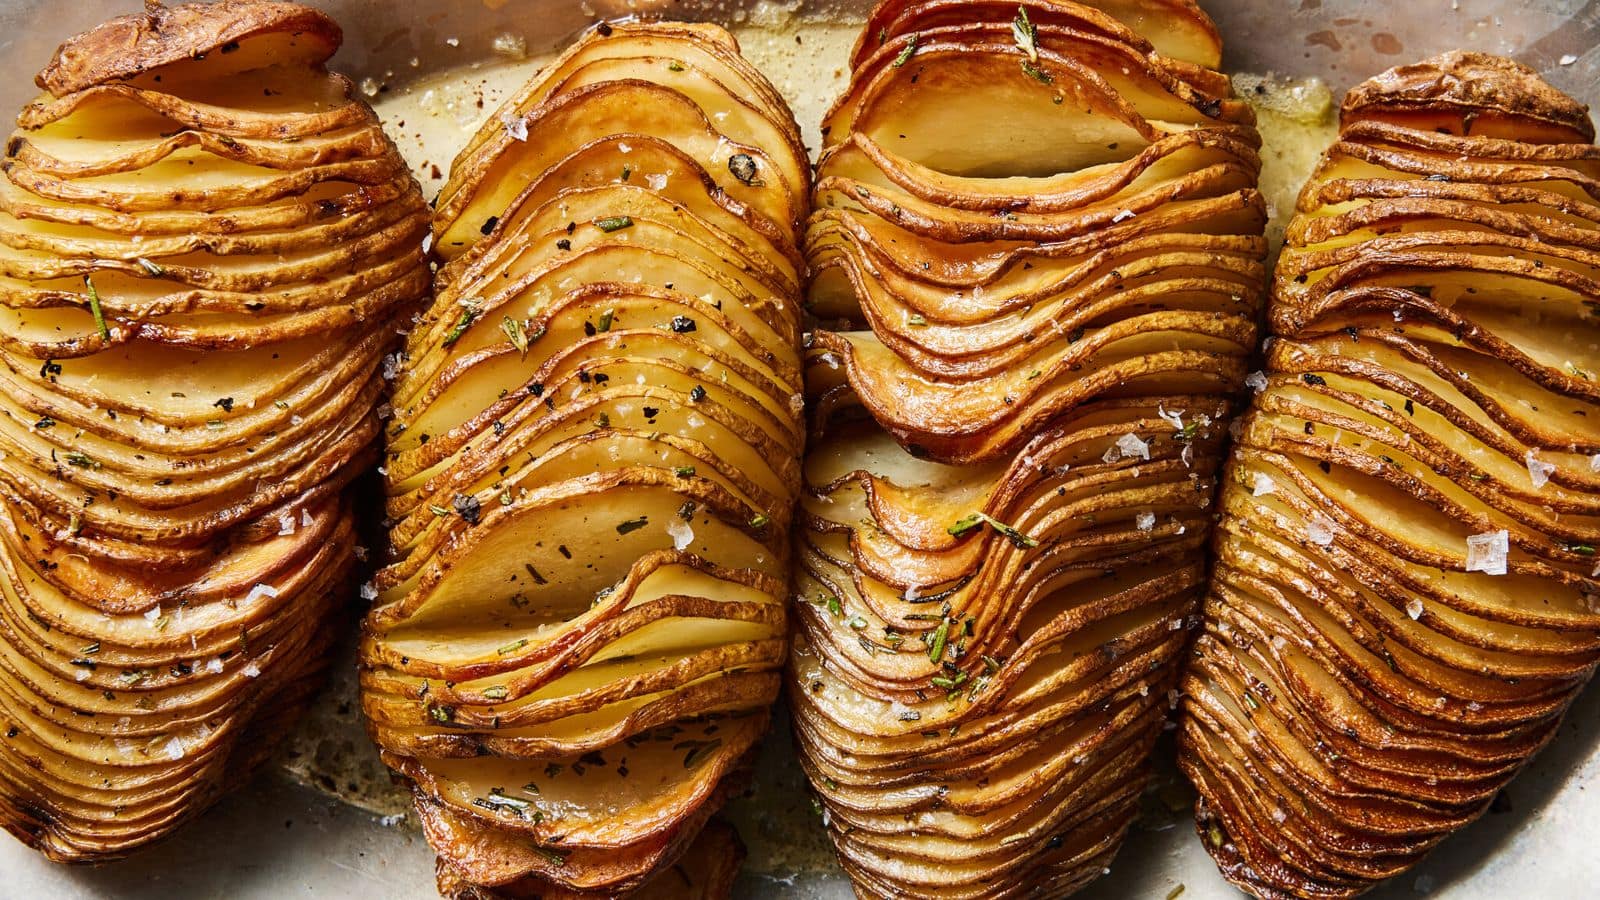 Guests coming over? Serve them this Swedish Hasselback potato dish